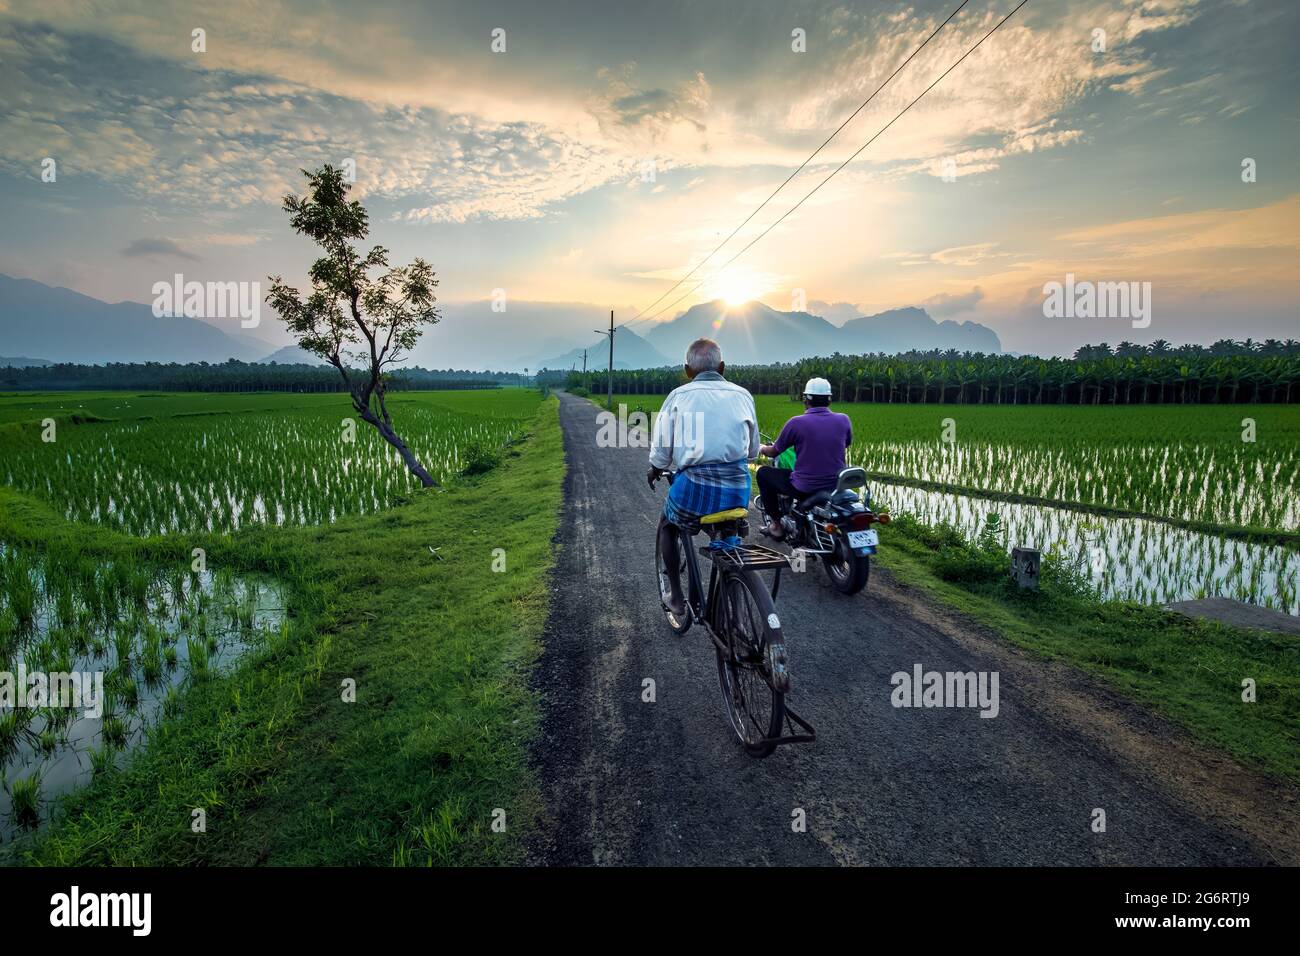 A village formers with bicycle and bike in rural growing Paddy rice filed near Nagercoil, Kanyakumari District, Tamil Nadu, South India.24-June-2021. Stock Photo